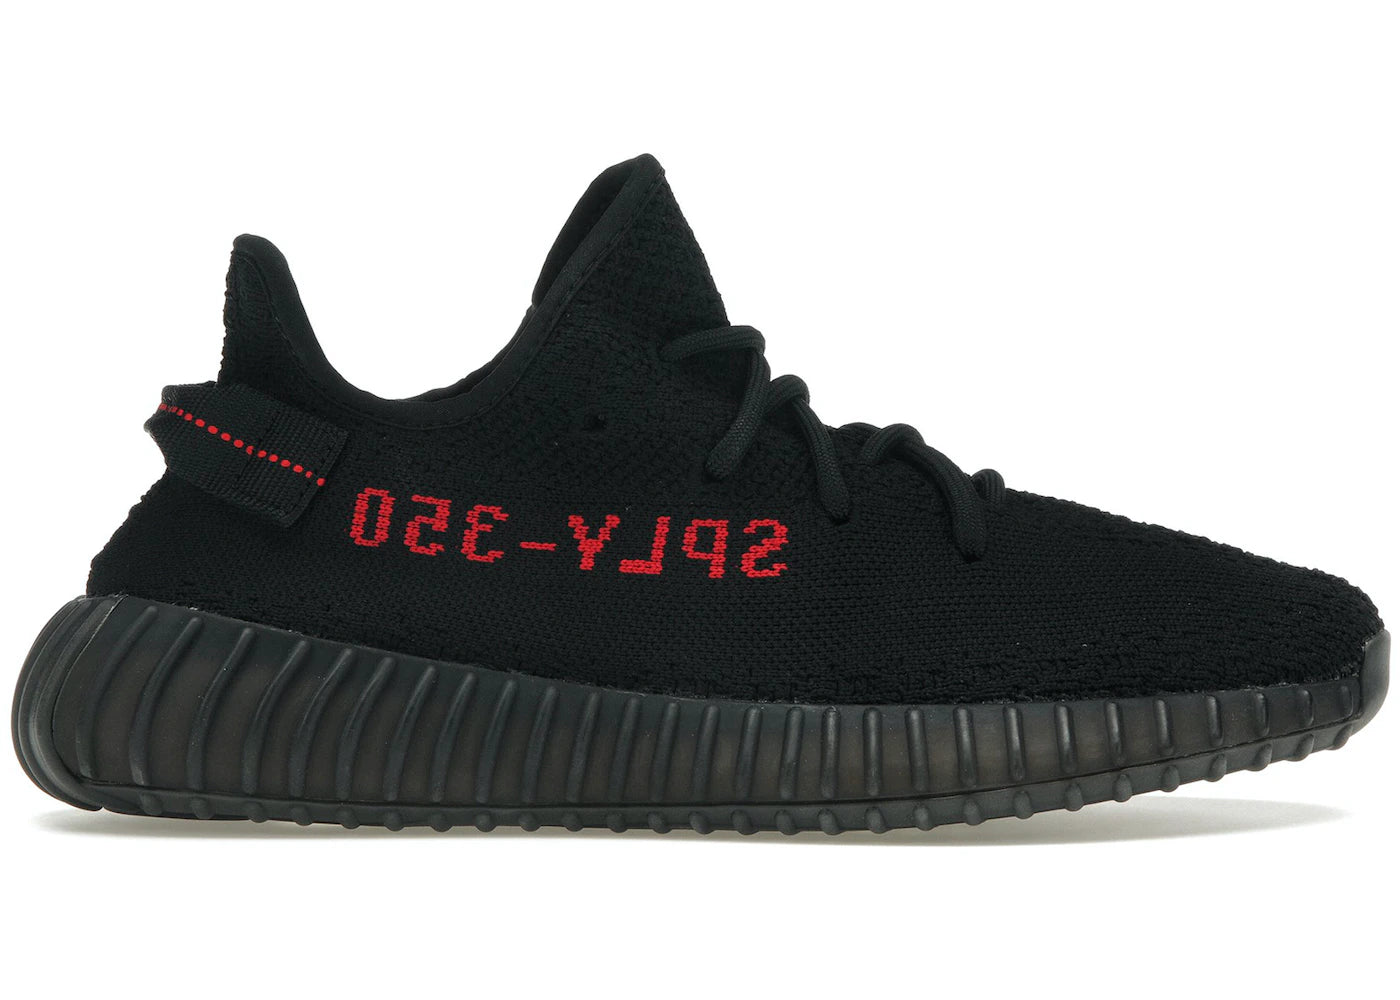 adidas Yeezy Boost 350 V2 Black Red (2017/2020) – Hypepoint.ca